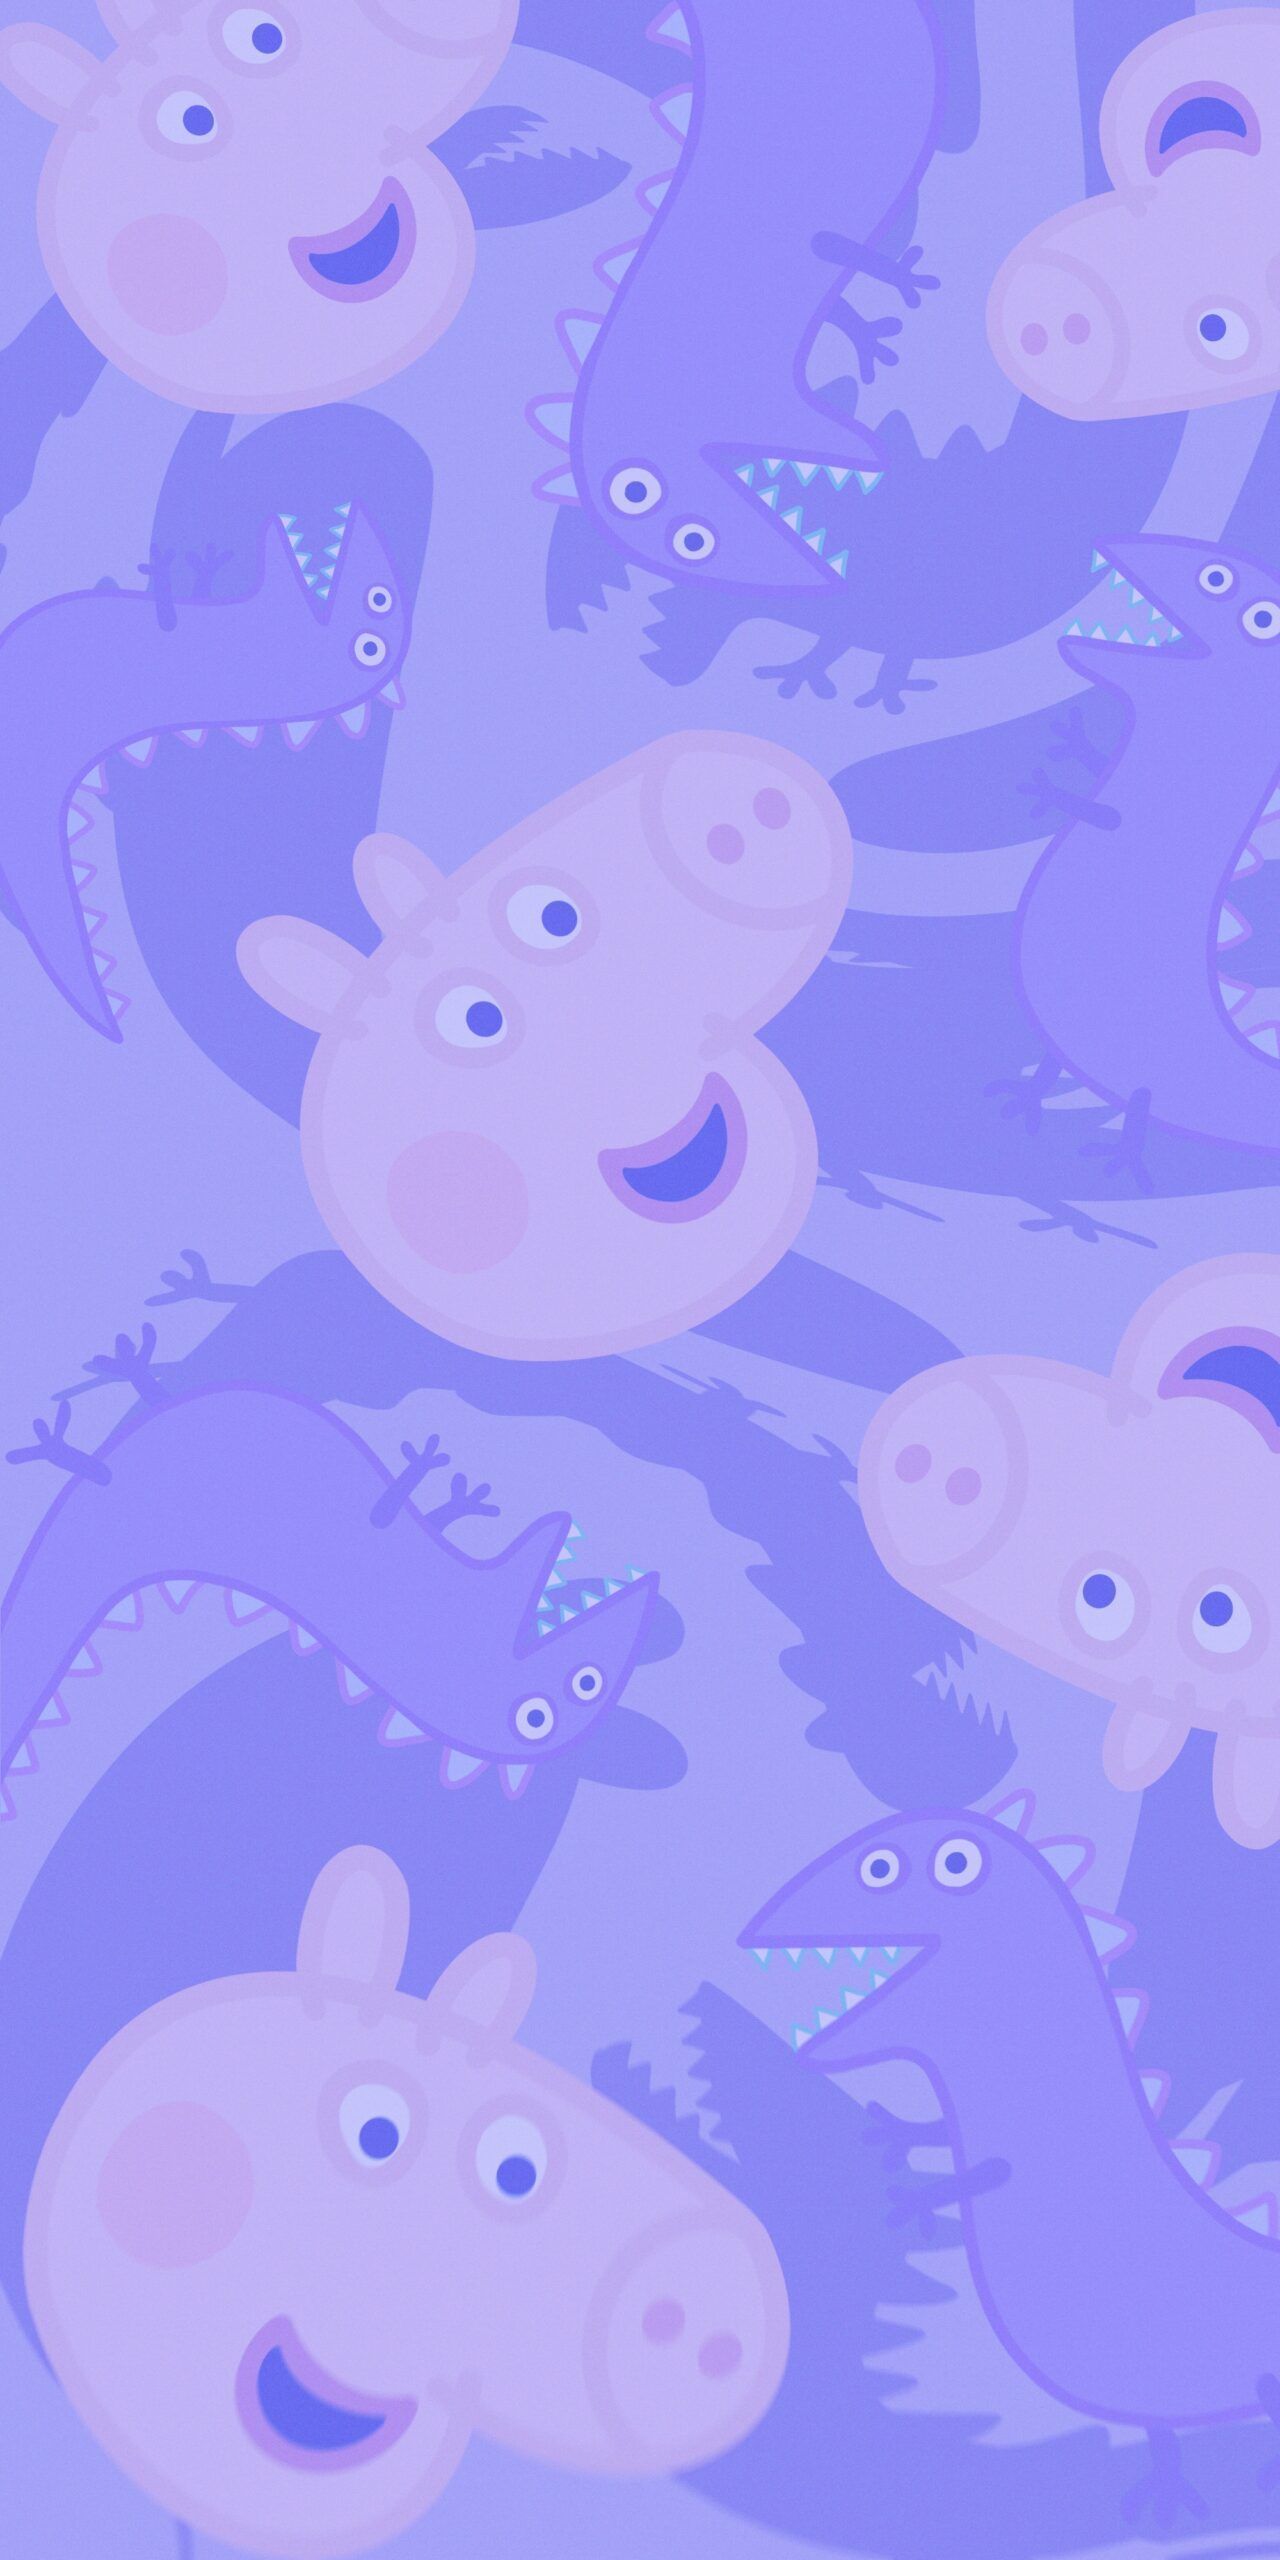 A pattern of purple and pink animals - Dinosaur, George Pig